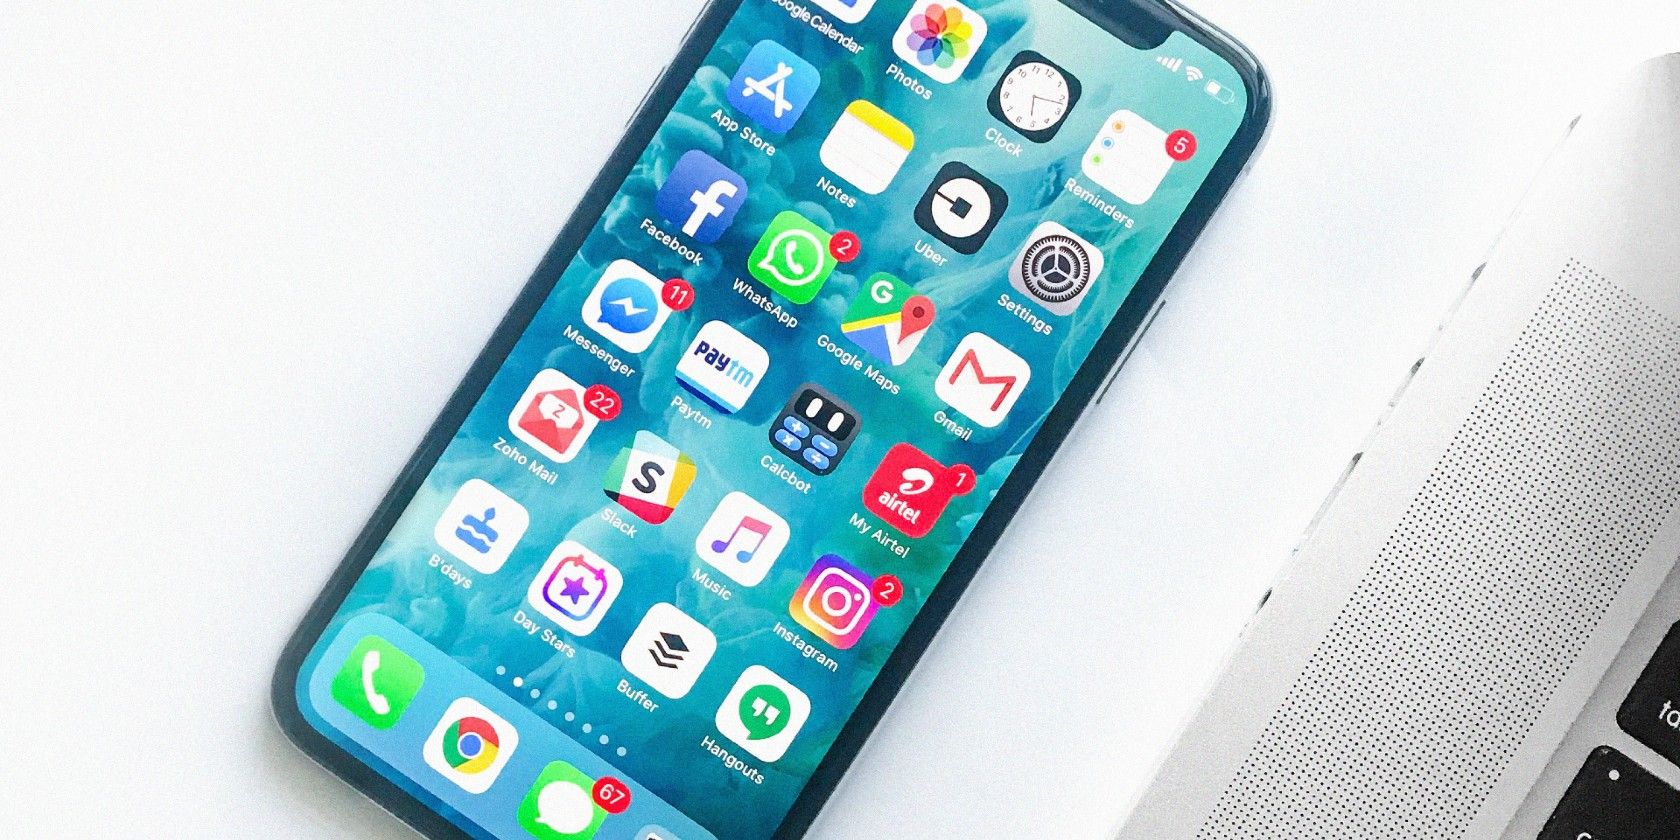 An unlocked iPhone showing the home screen laying on a white table.